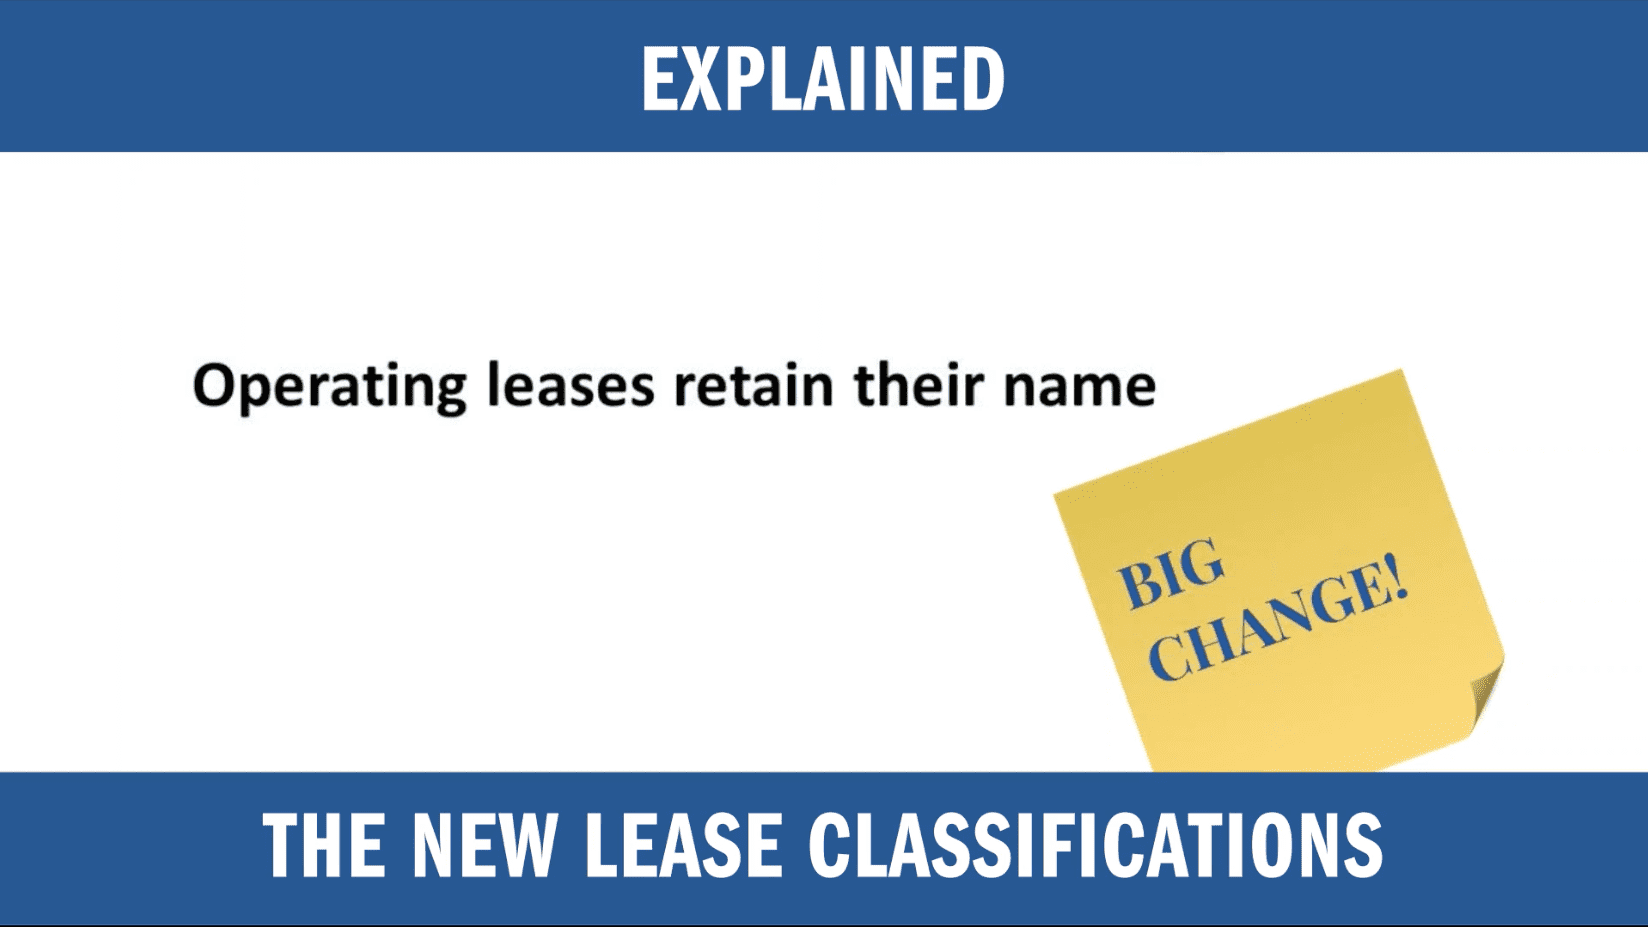 Explained: The New Lease Classifications